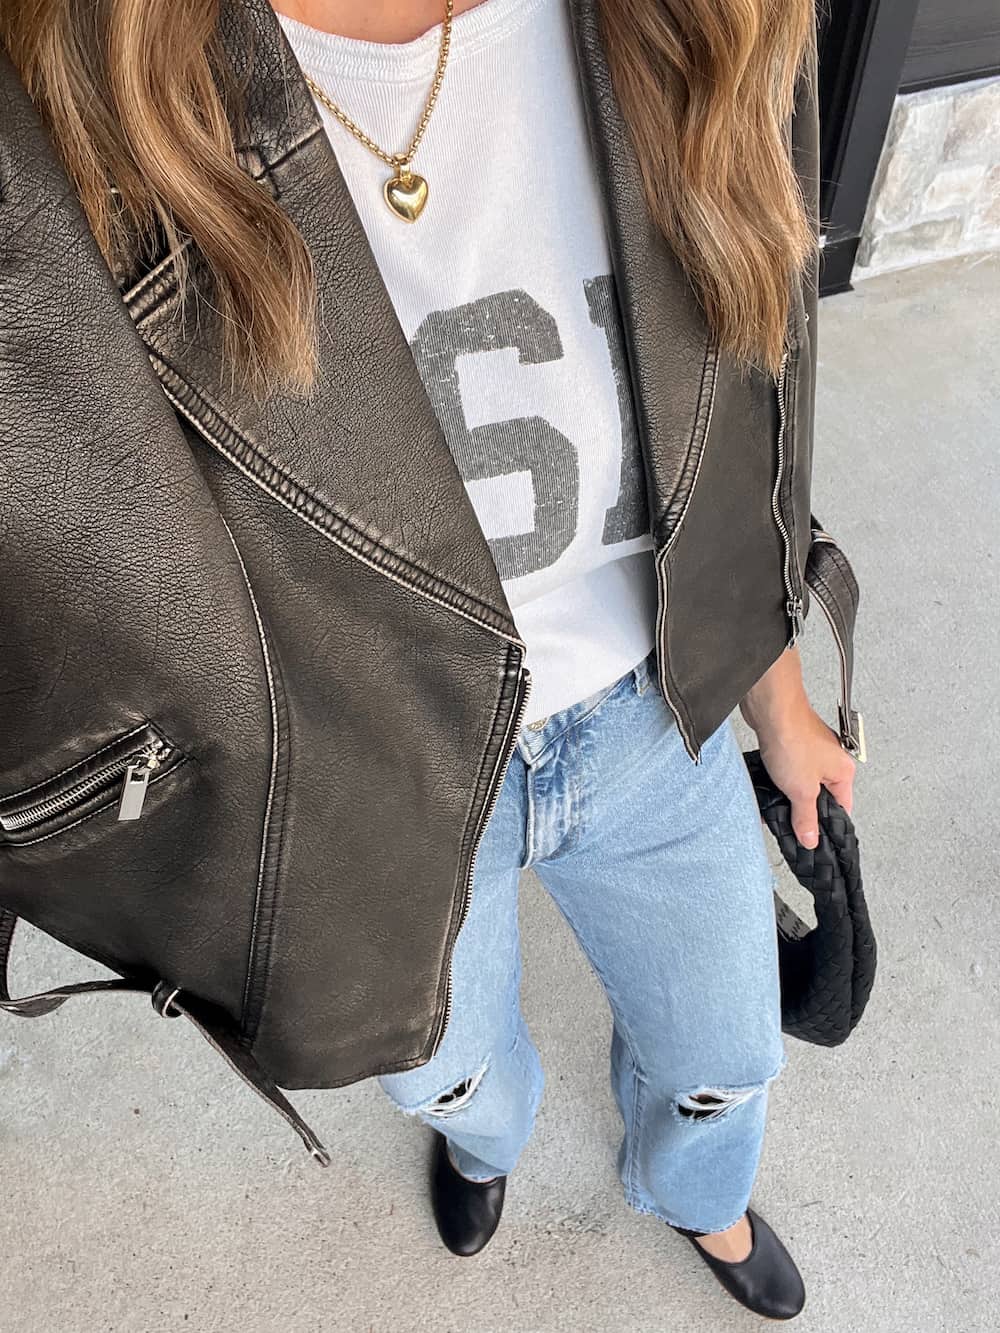 Christal wearing distressed jeans with a graphic tee under a leather jacket.